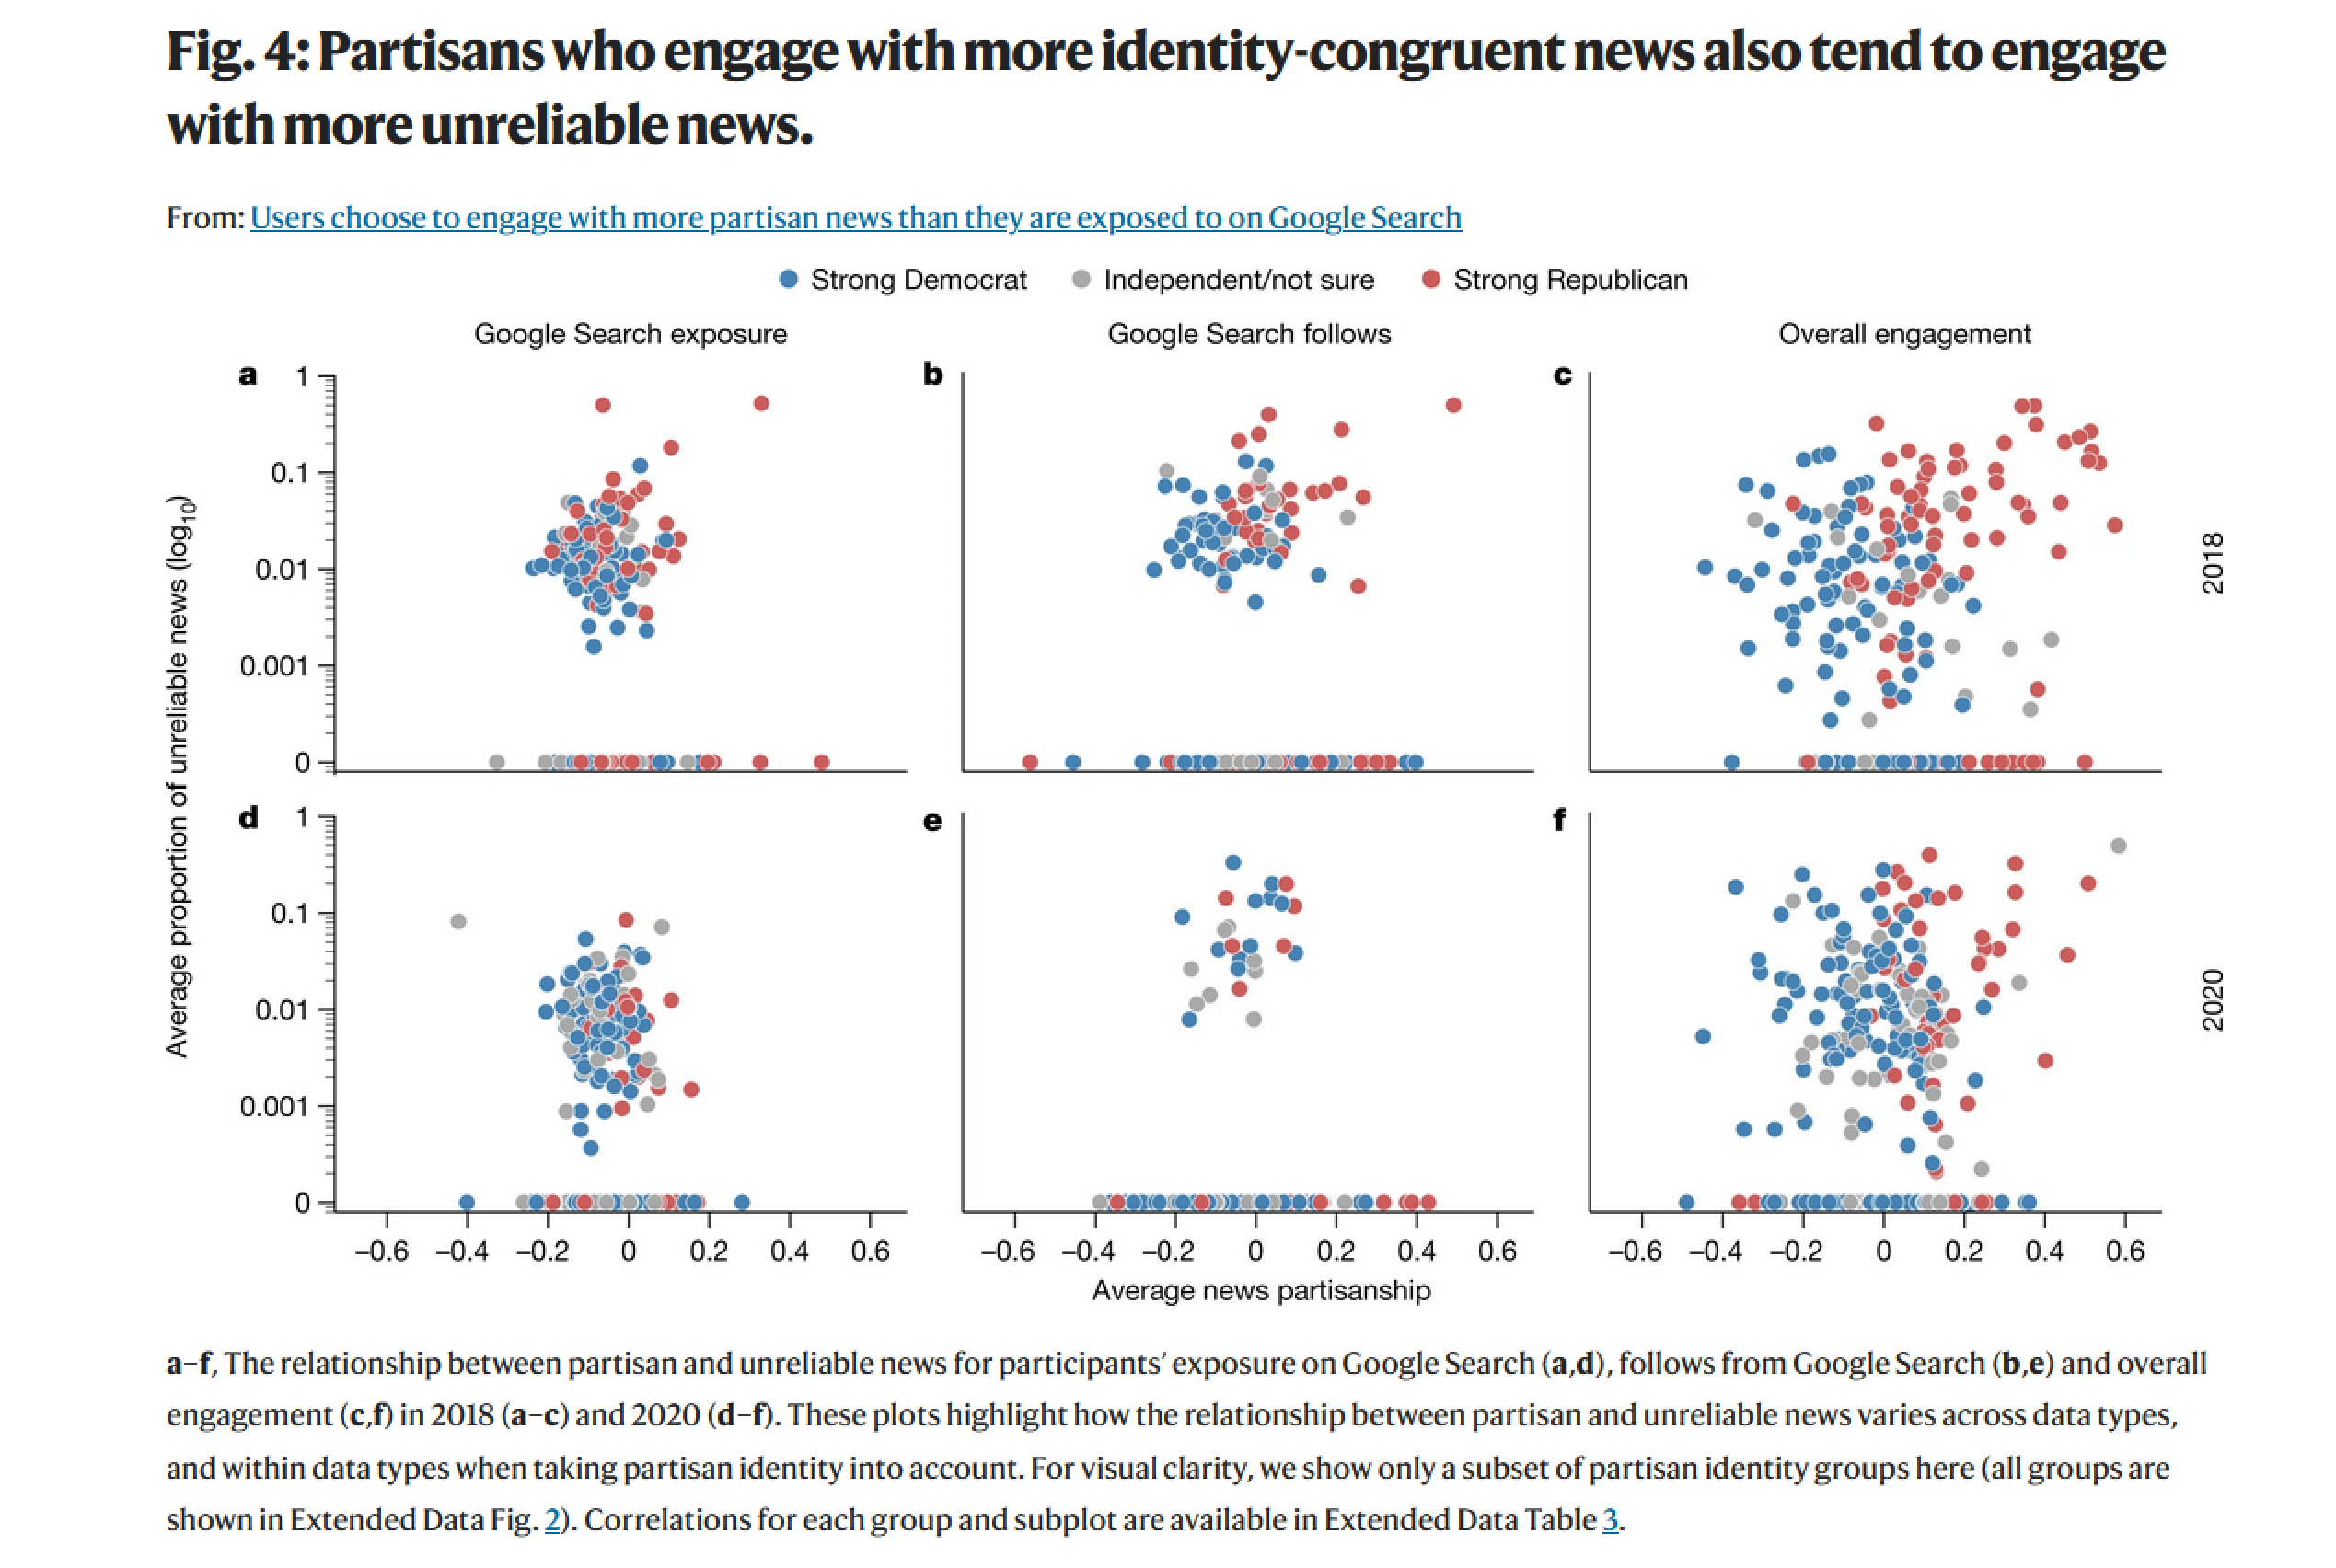 Users choose to engage with more partisan news than they are exposed to on Google Search